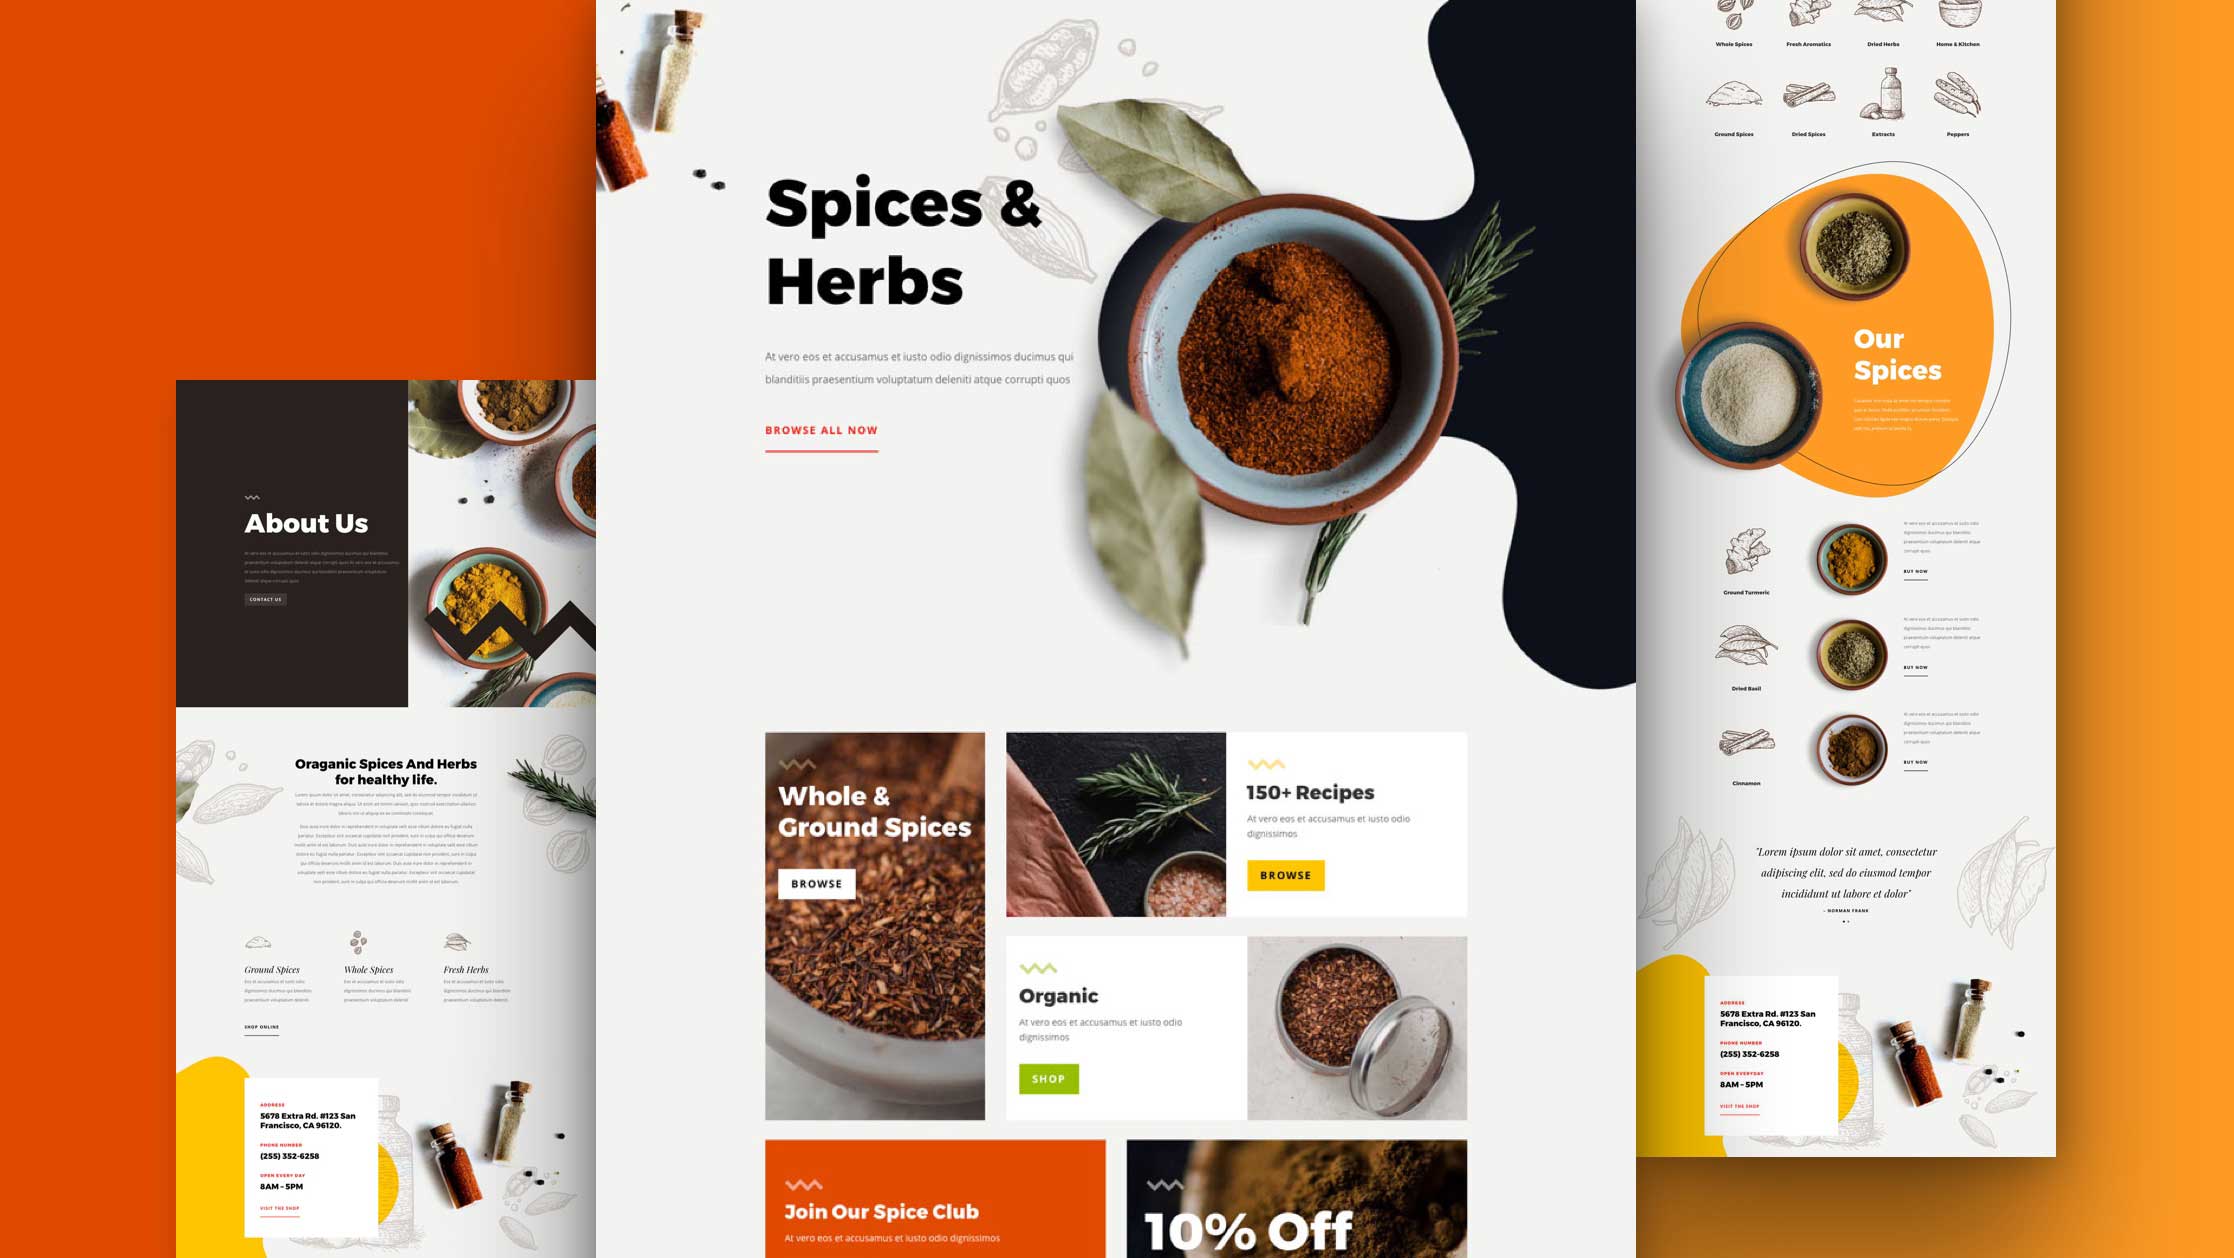 Get a FREE Spice Shop Layout Pack for Divi